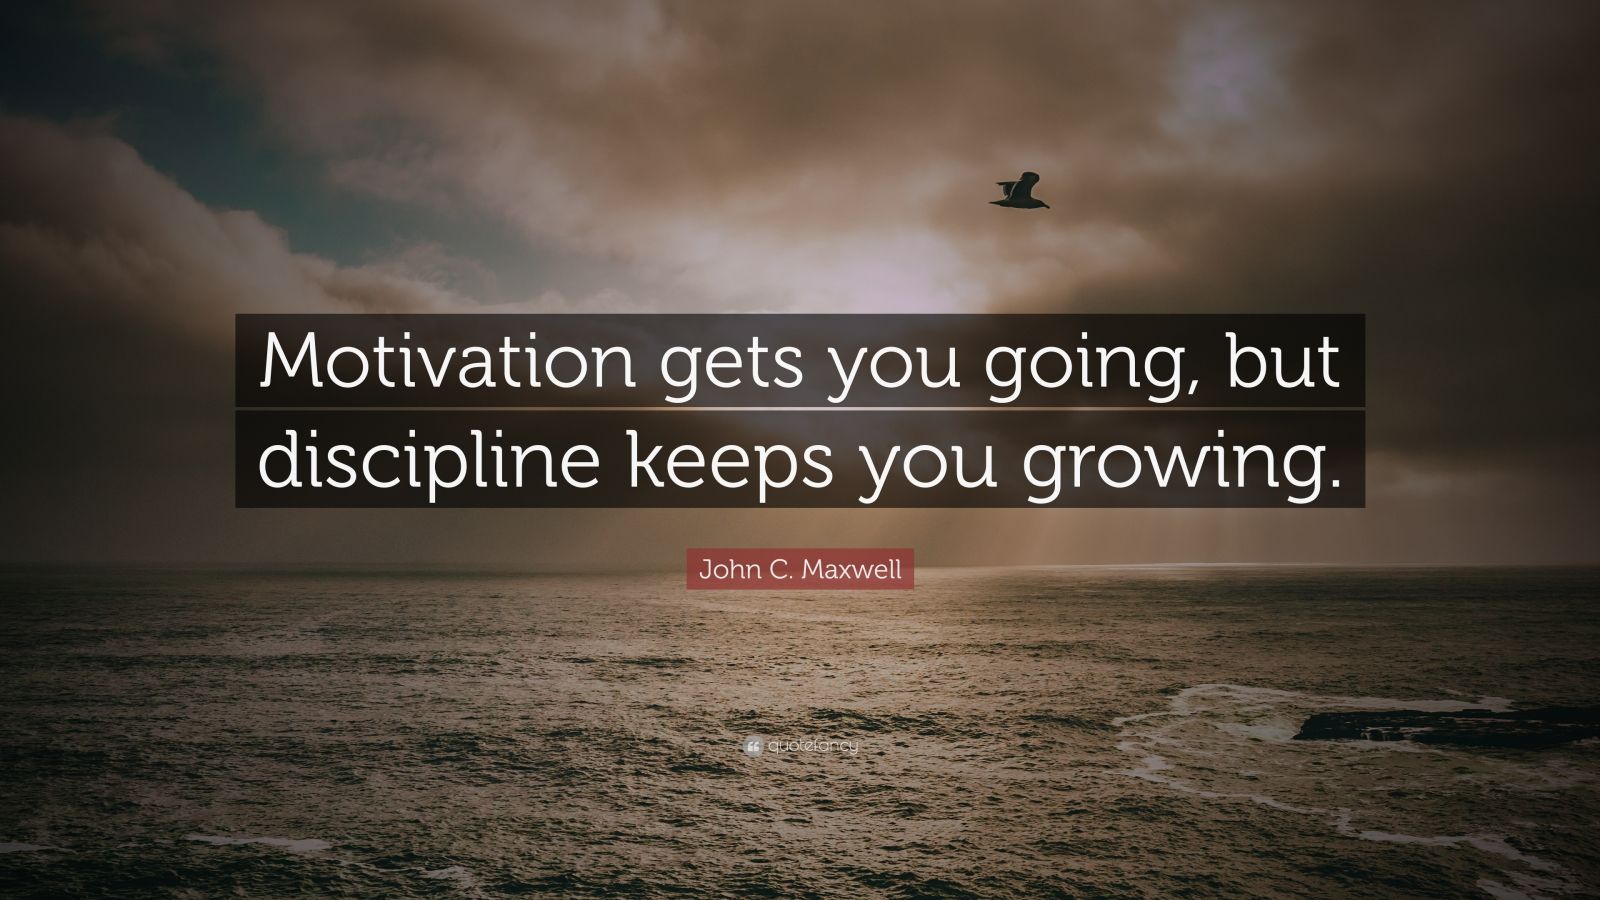 John C. Maxwell Quote: “Motivation gets you going, but discipline keeps ...